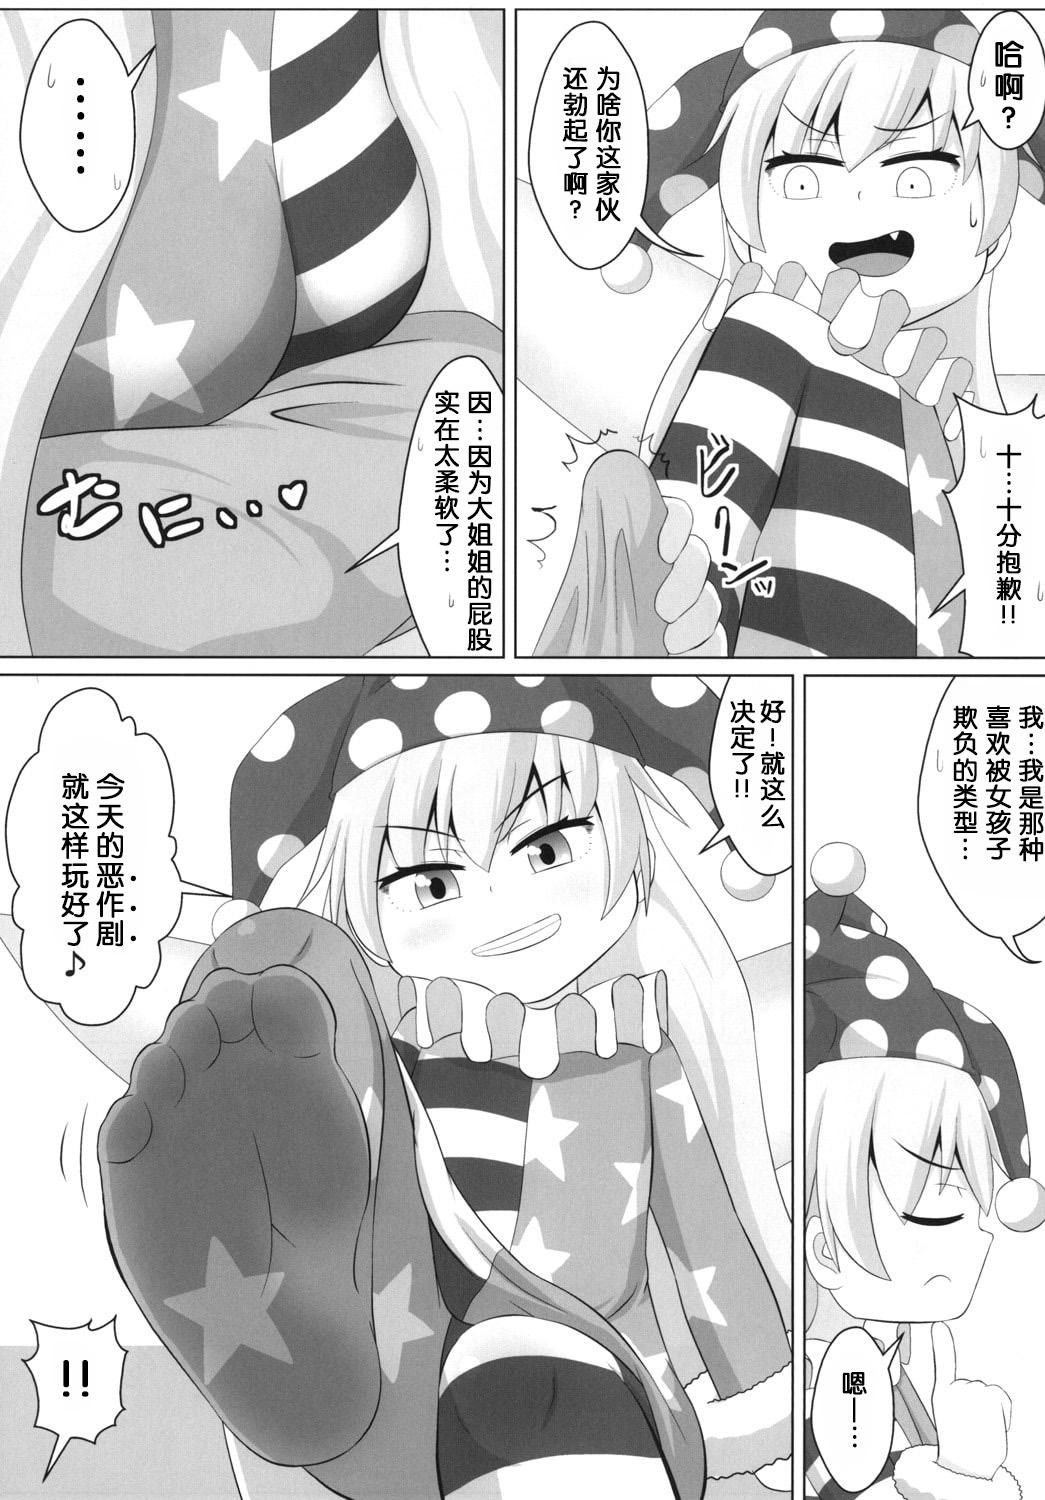 Exhibitionist Yousei no Itazura - Touhou project Bra - Page 6